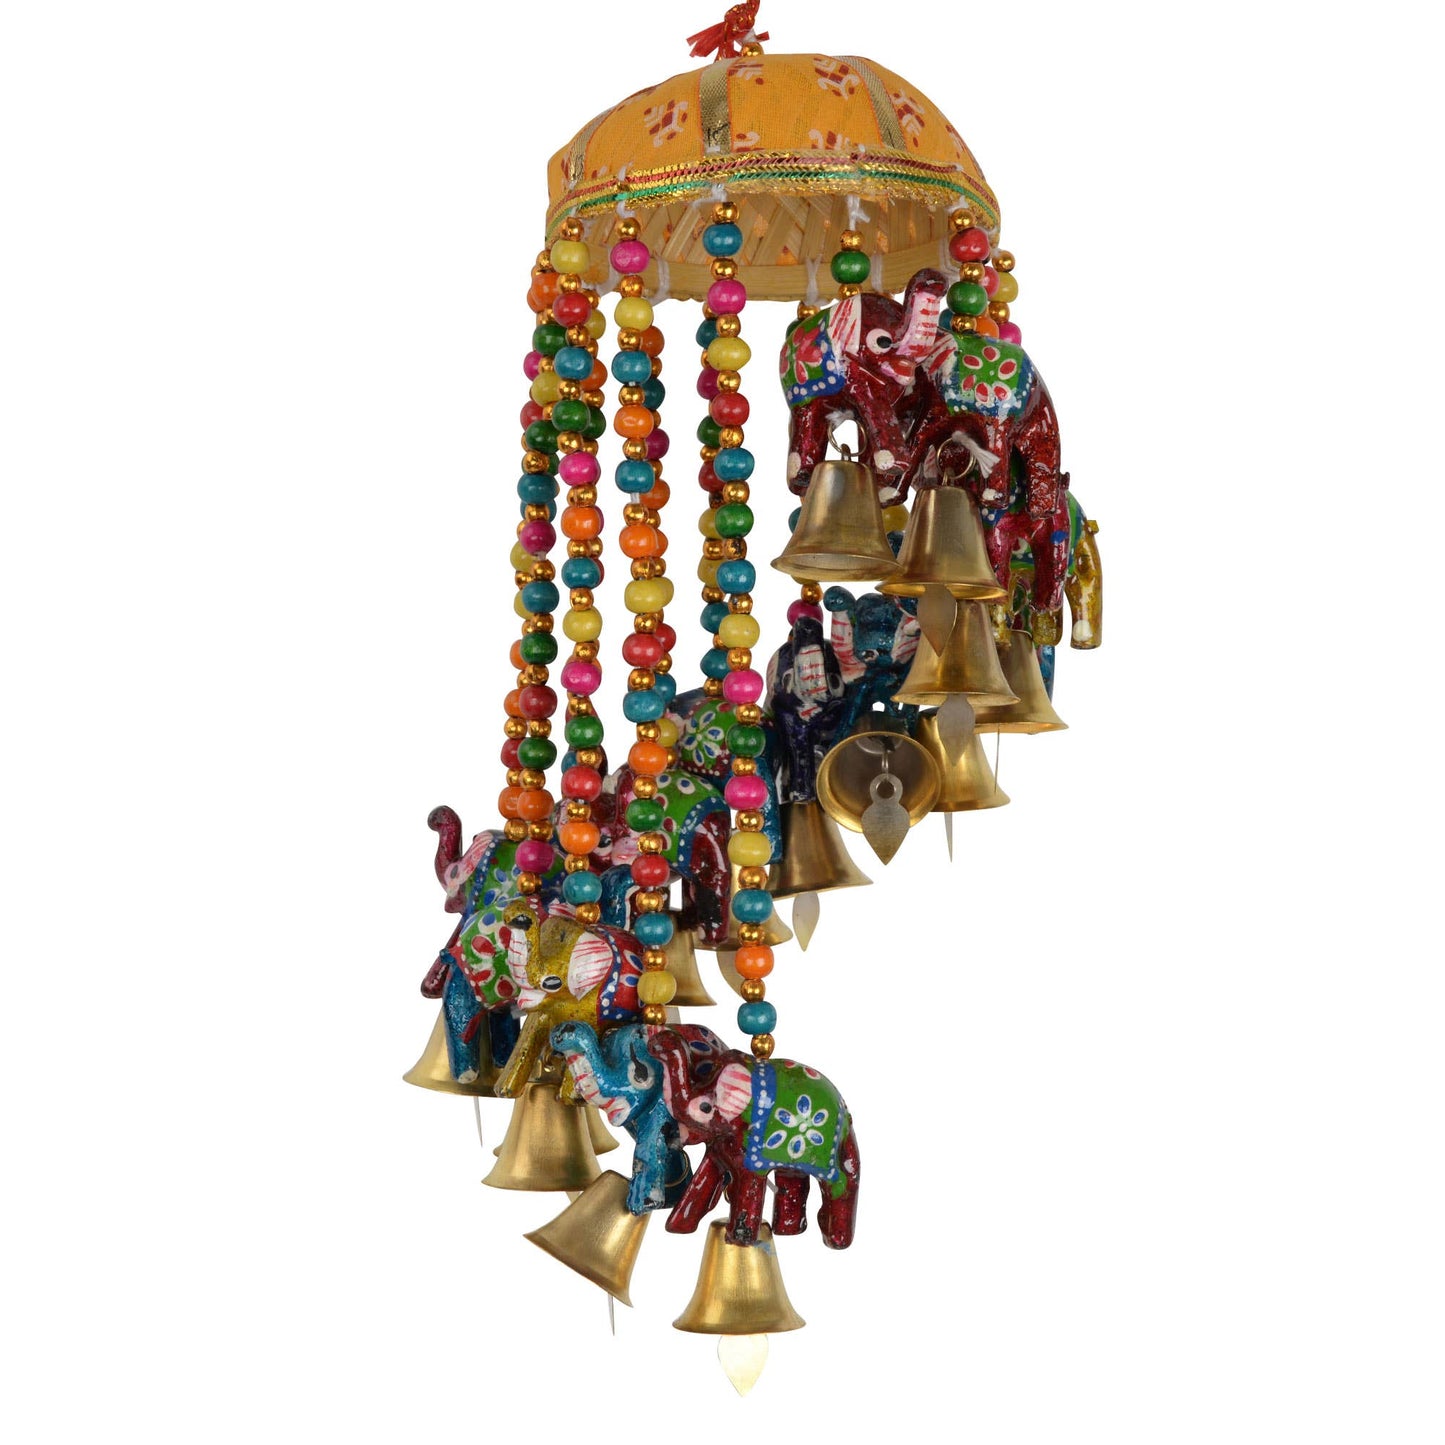 Recycled Fifteen Elephant Chime